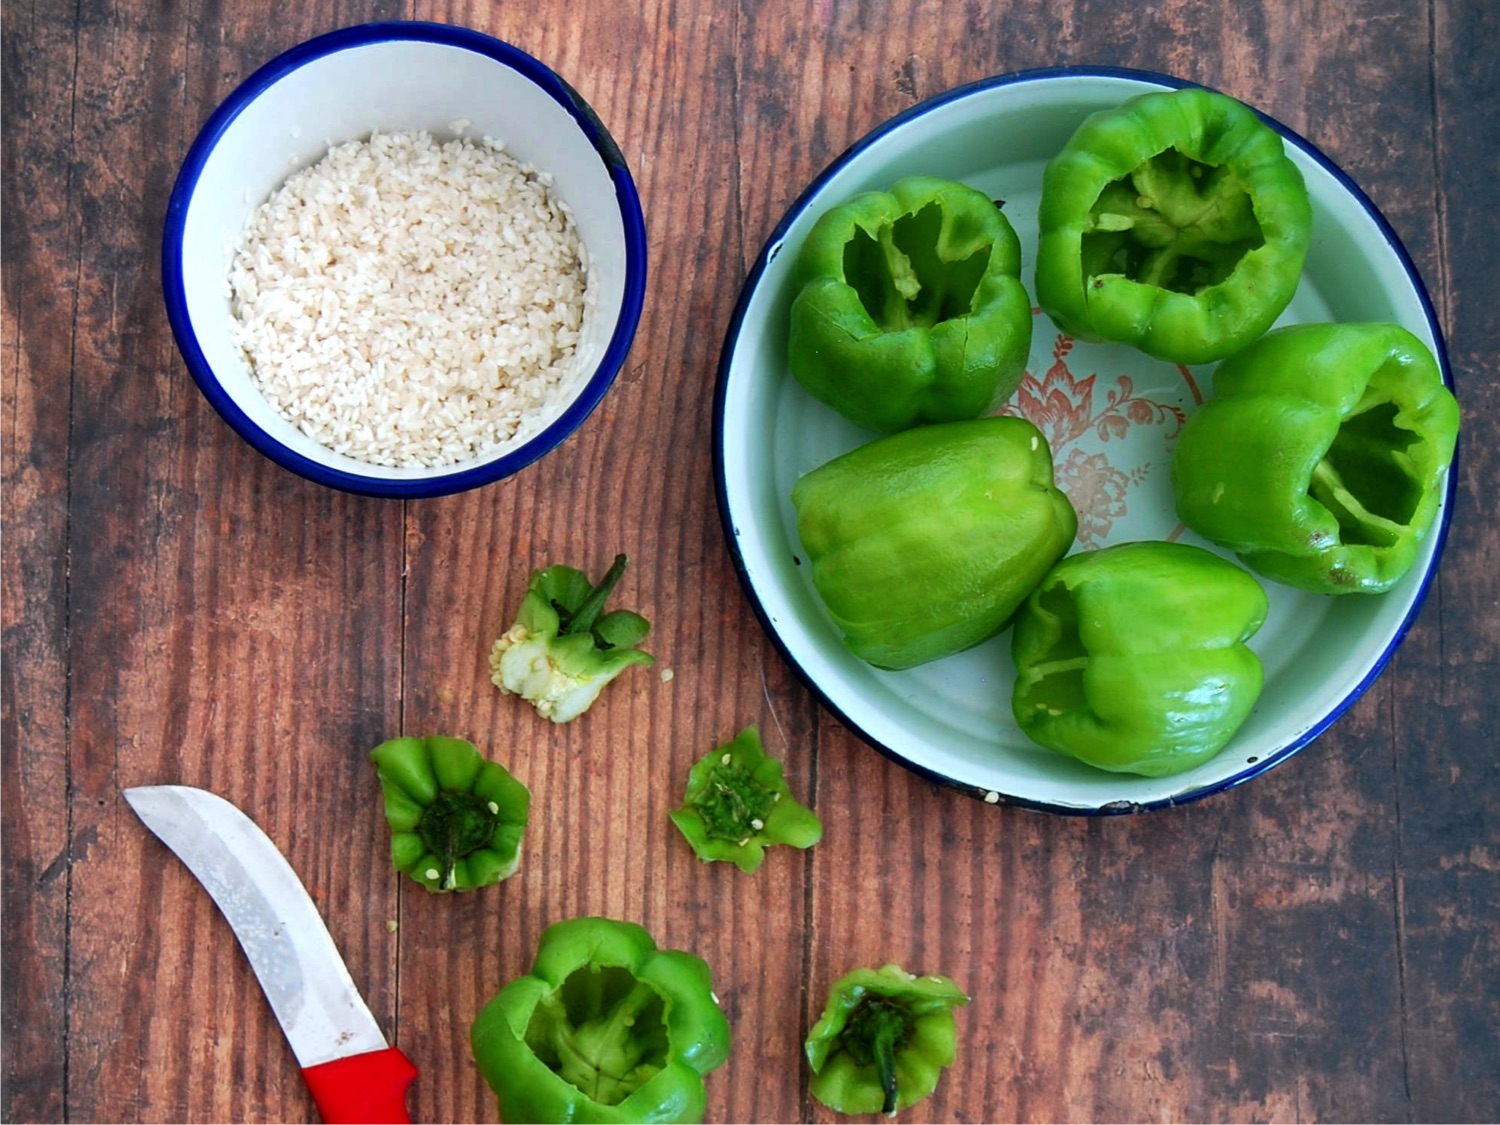 A bowl of uncocked rice with a tray of hollowed out bell peppers. Red handled knife peaking throuh picture